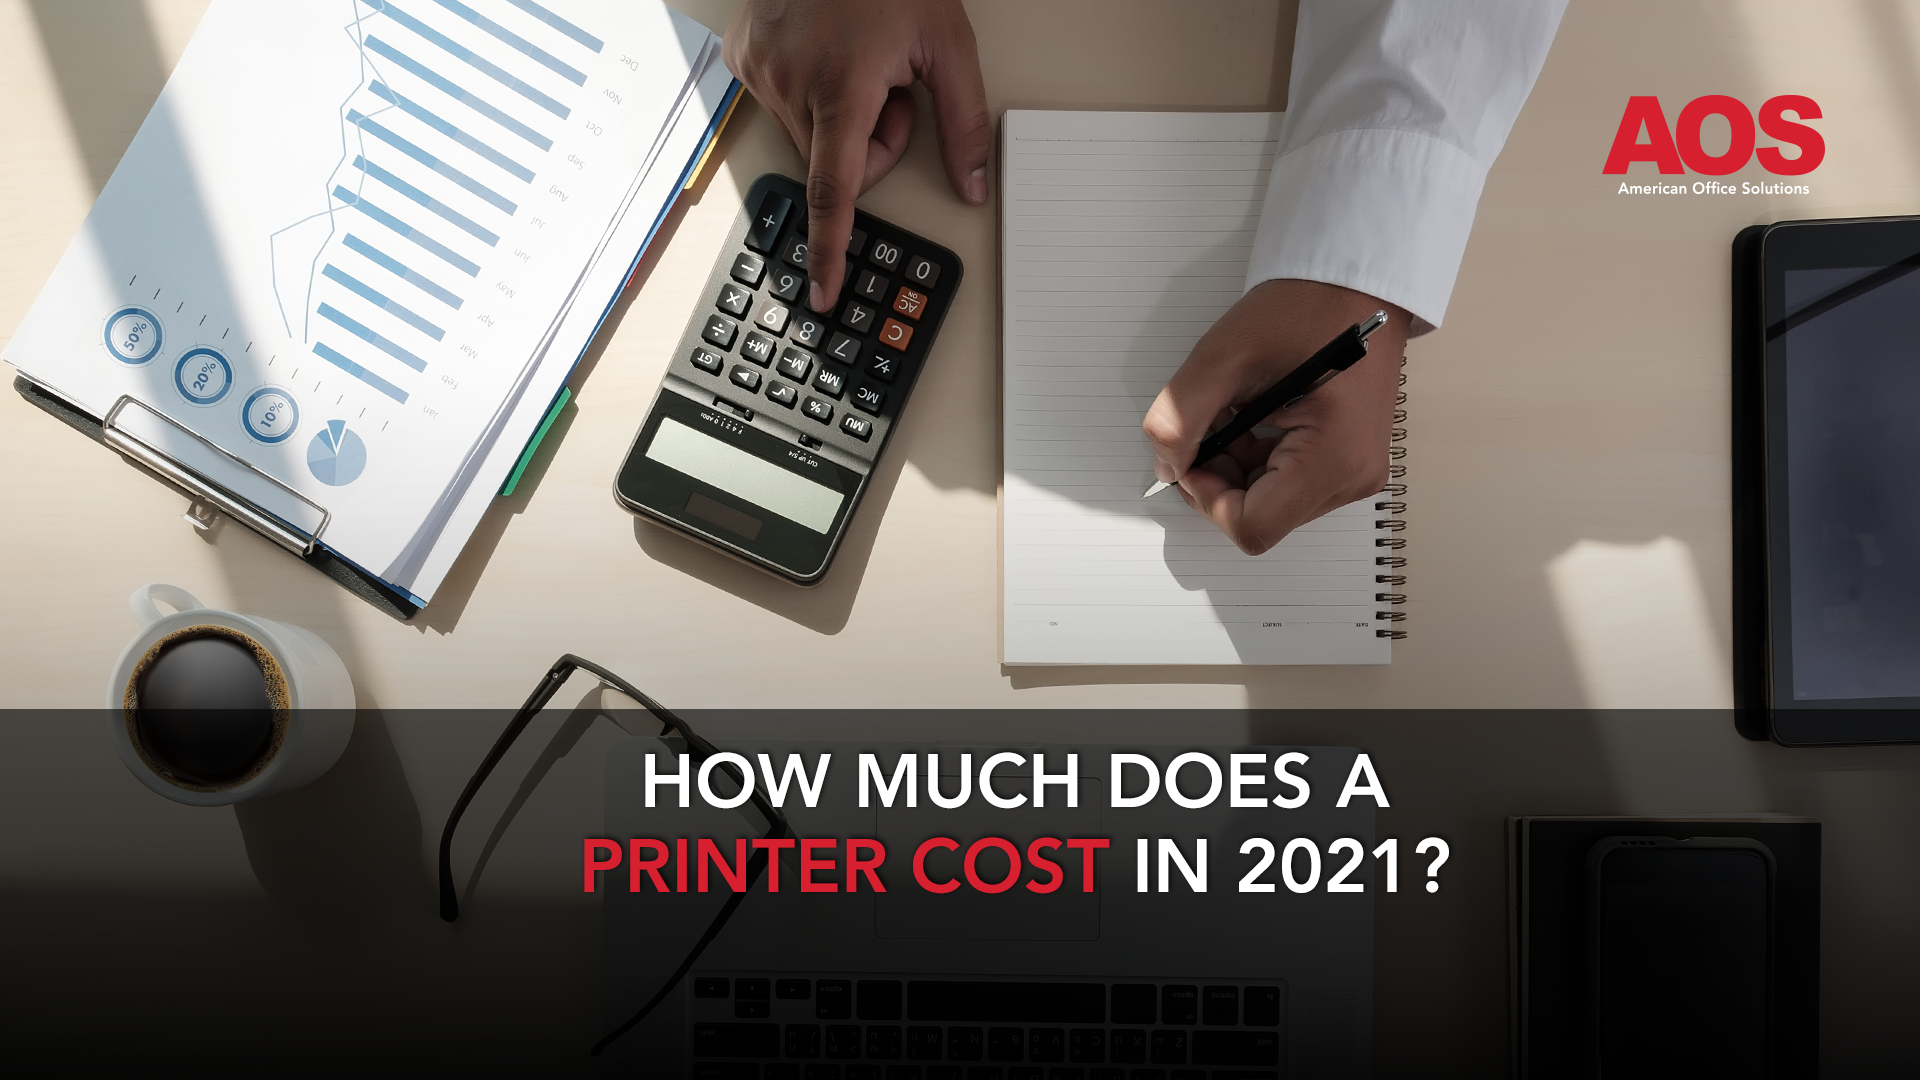 How Much Does a Printer Cost in 2021?